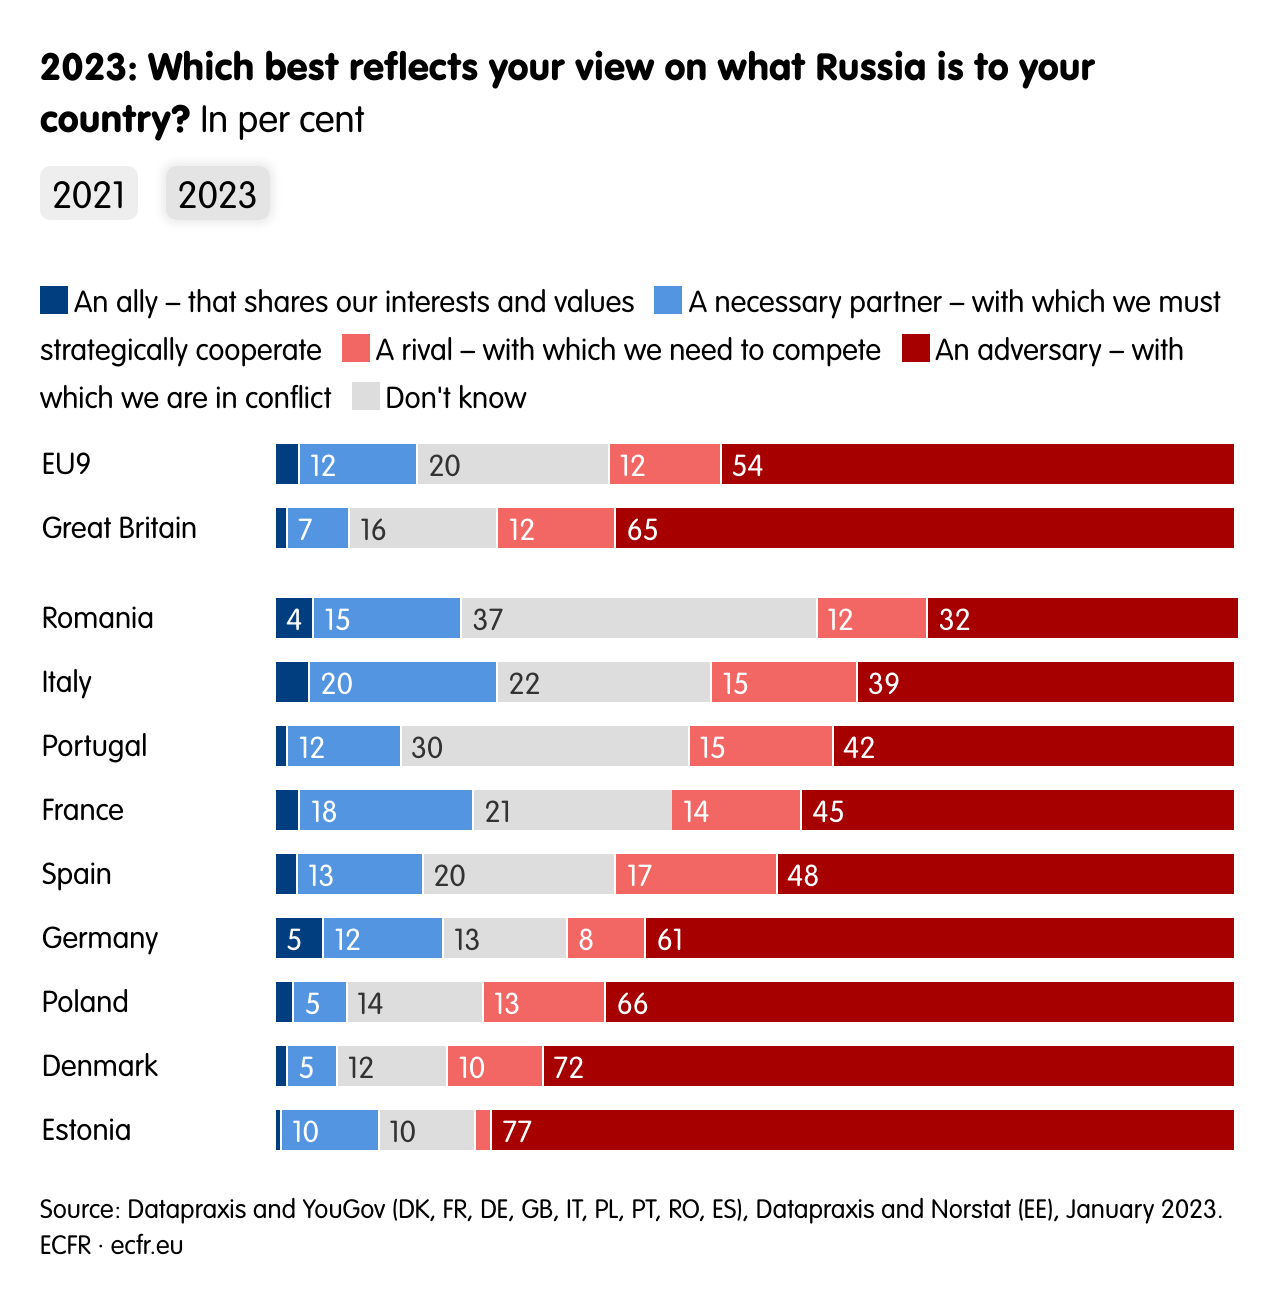 2023: Which best reflects your view on what Russia is to your country?